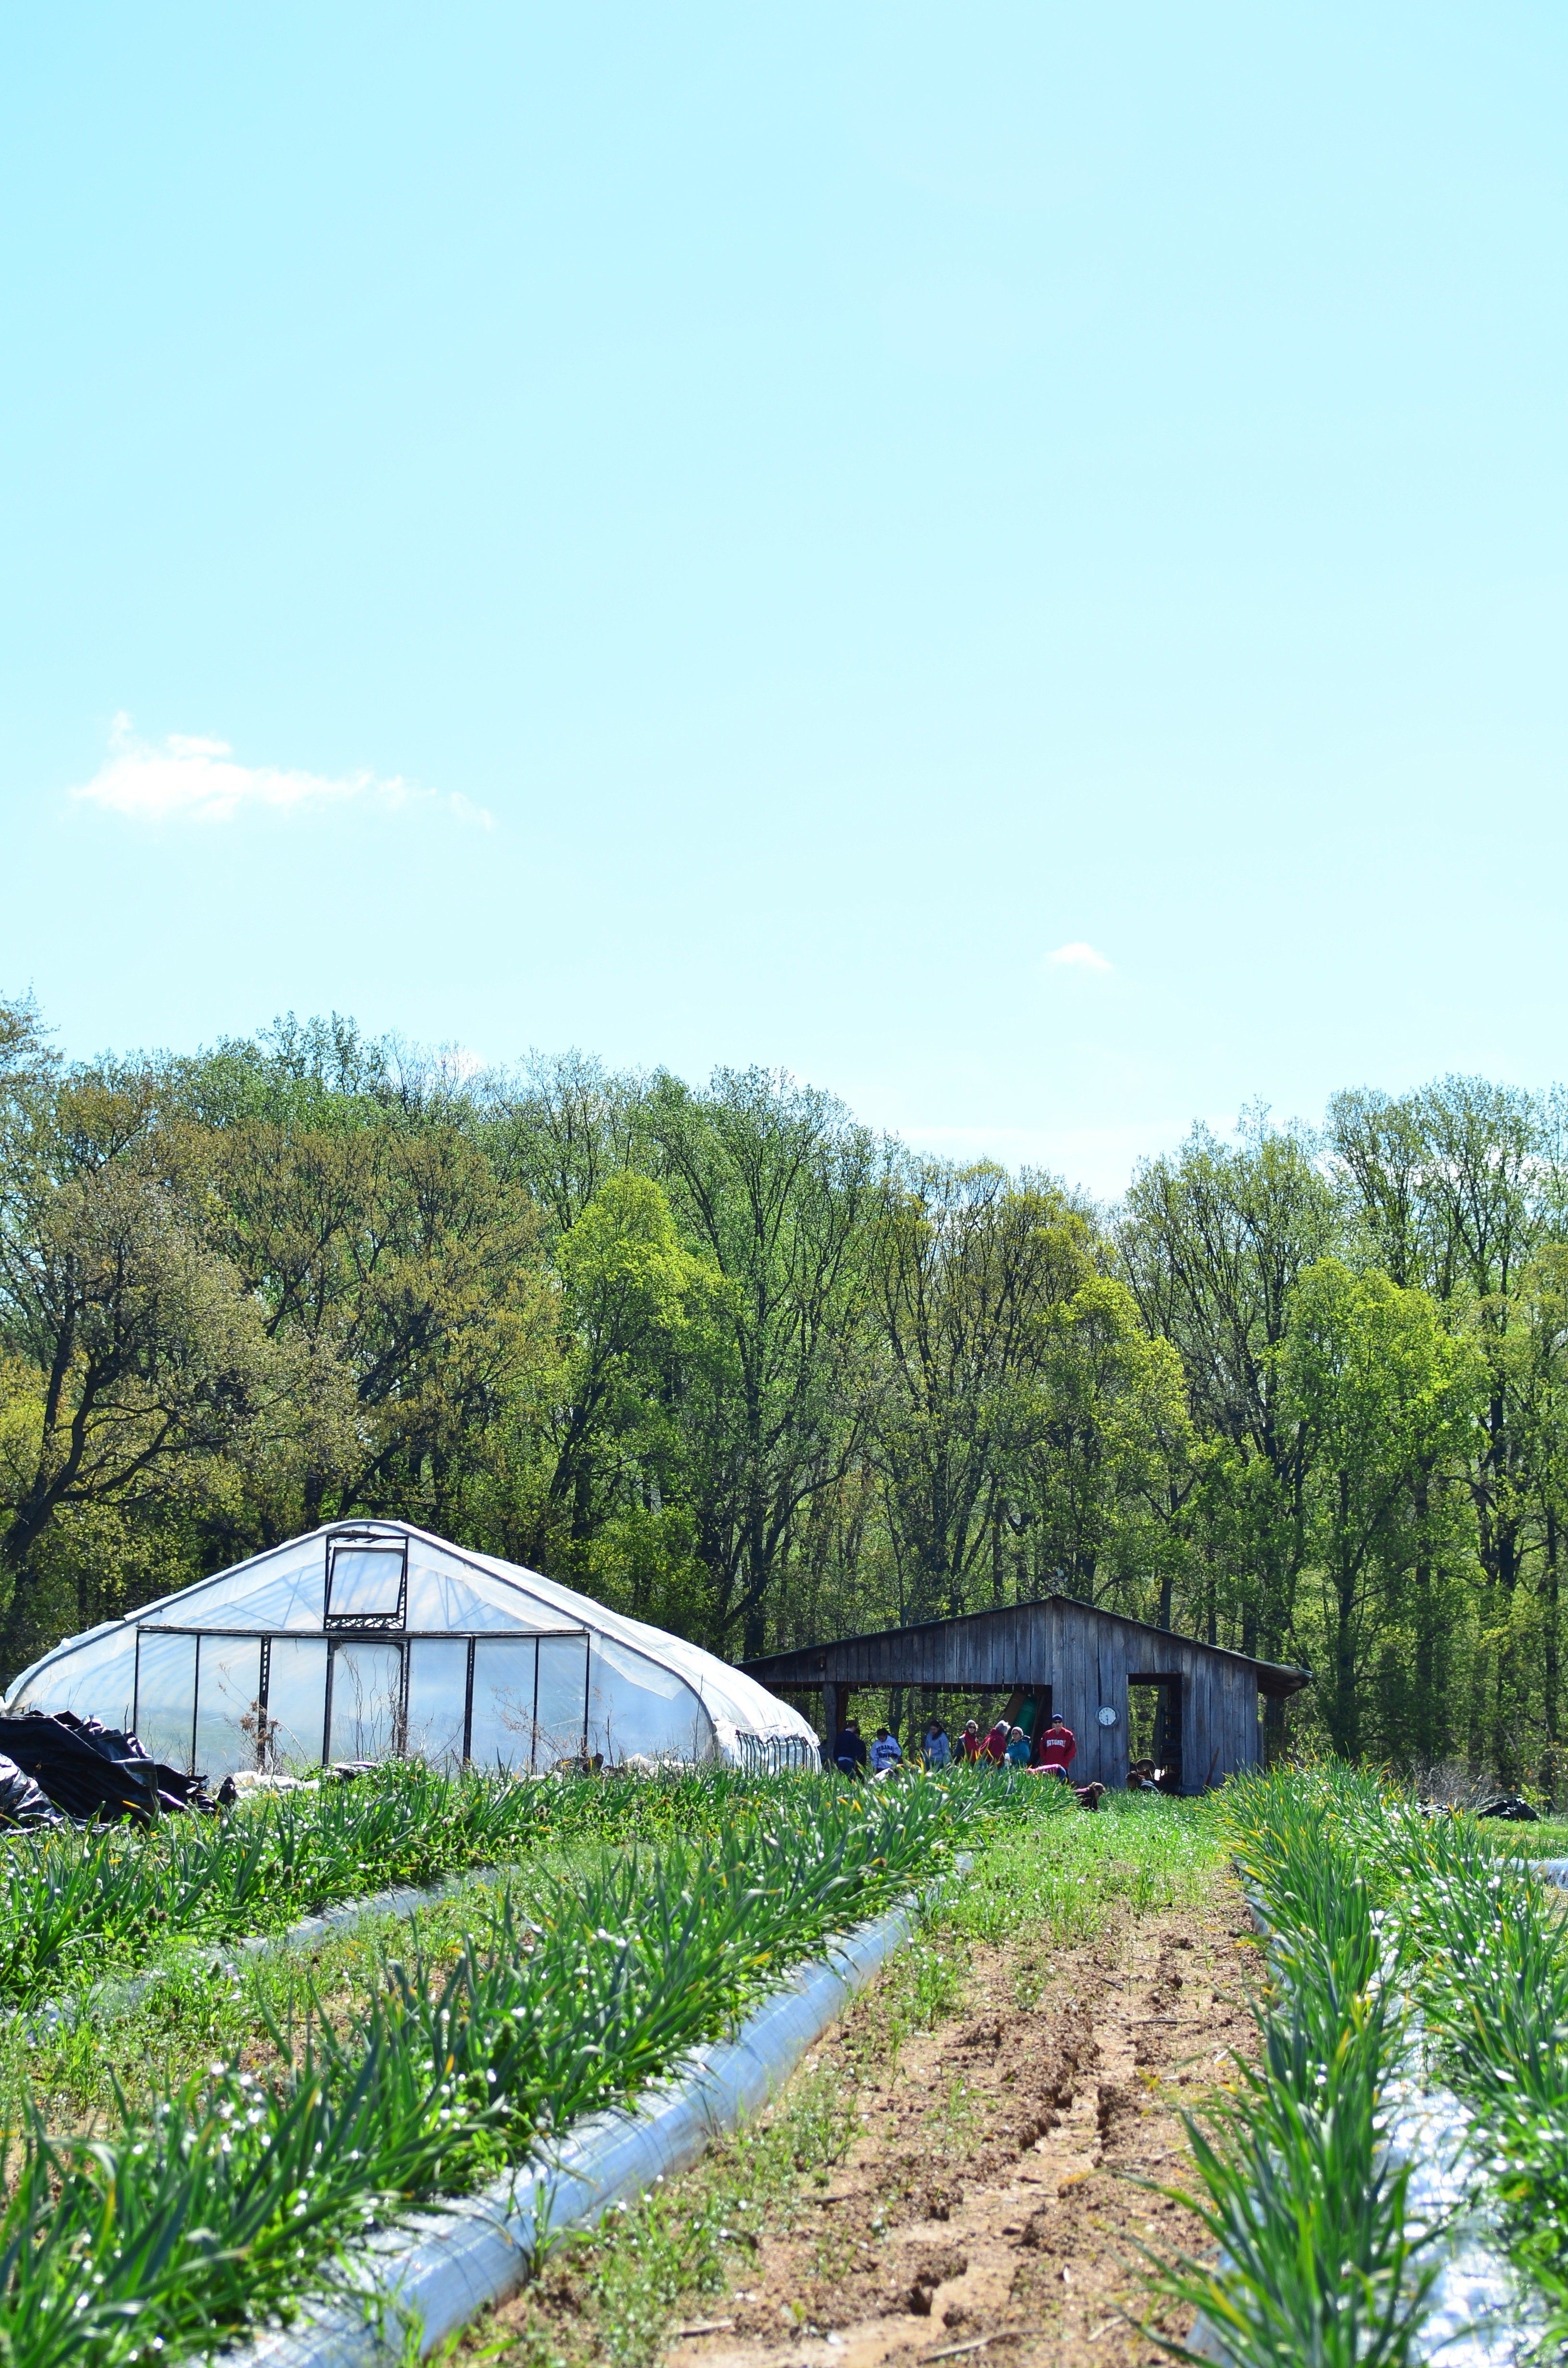 Next Happening: Farm Stand Pop-Up Happening July 17